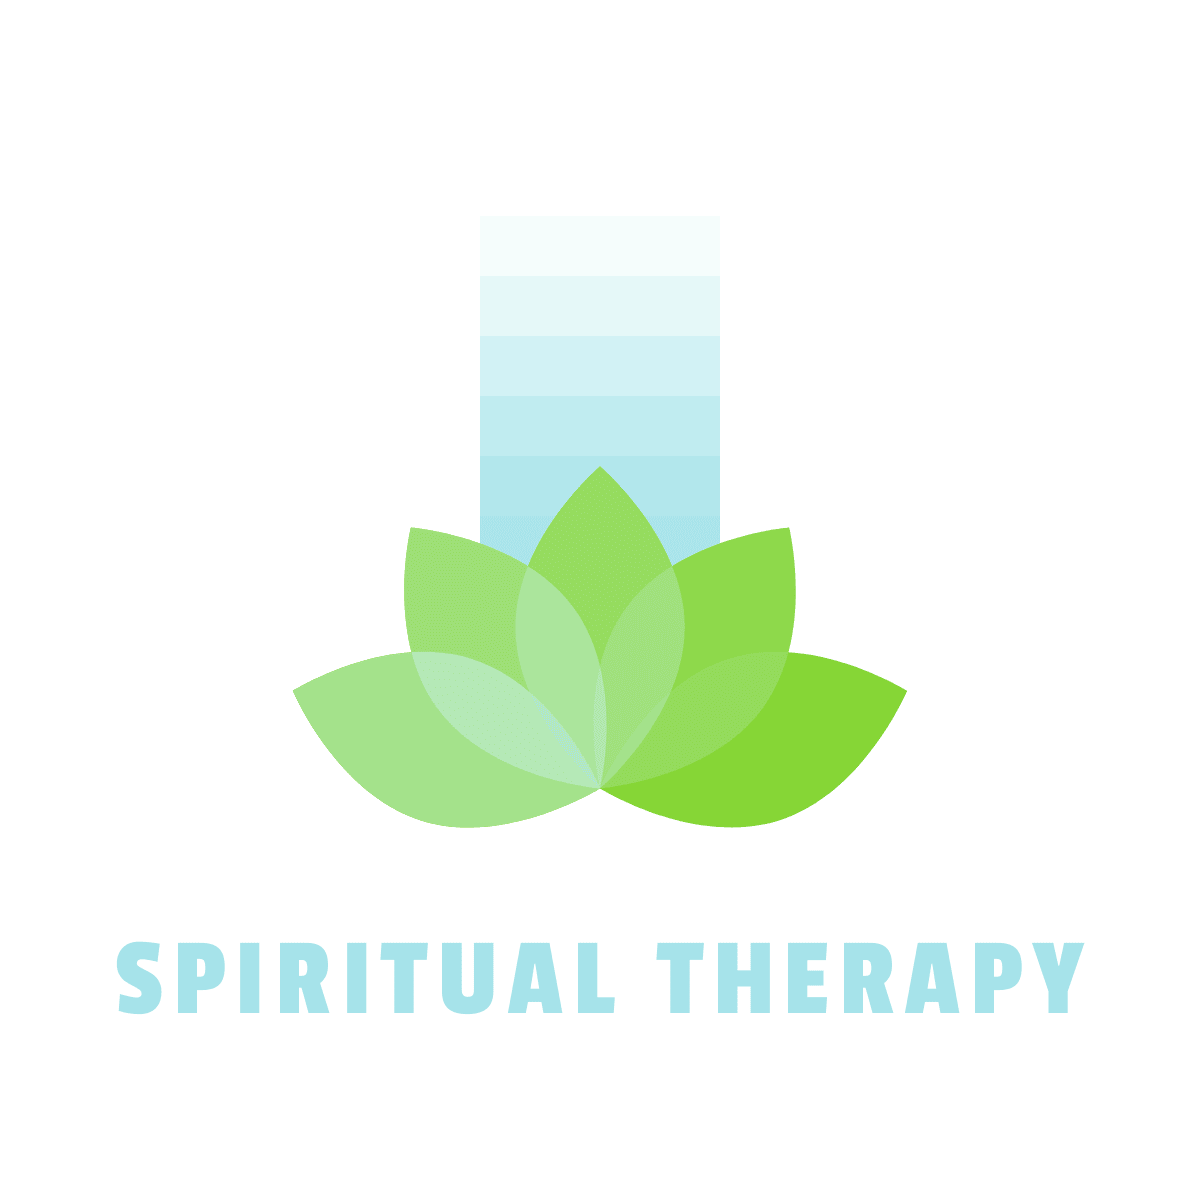 Spiritual Therapy for the Evolving Soul